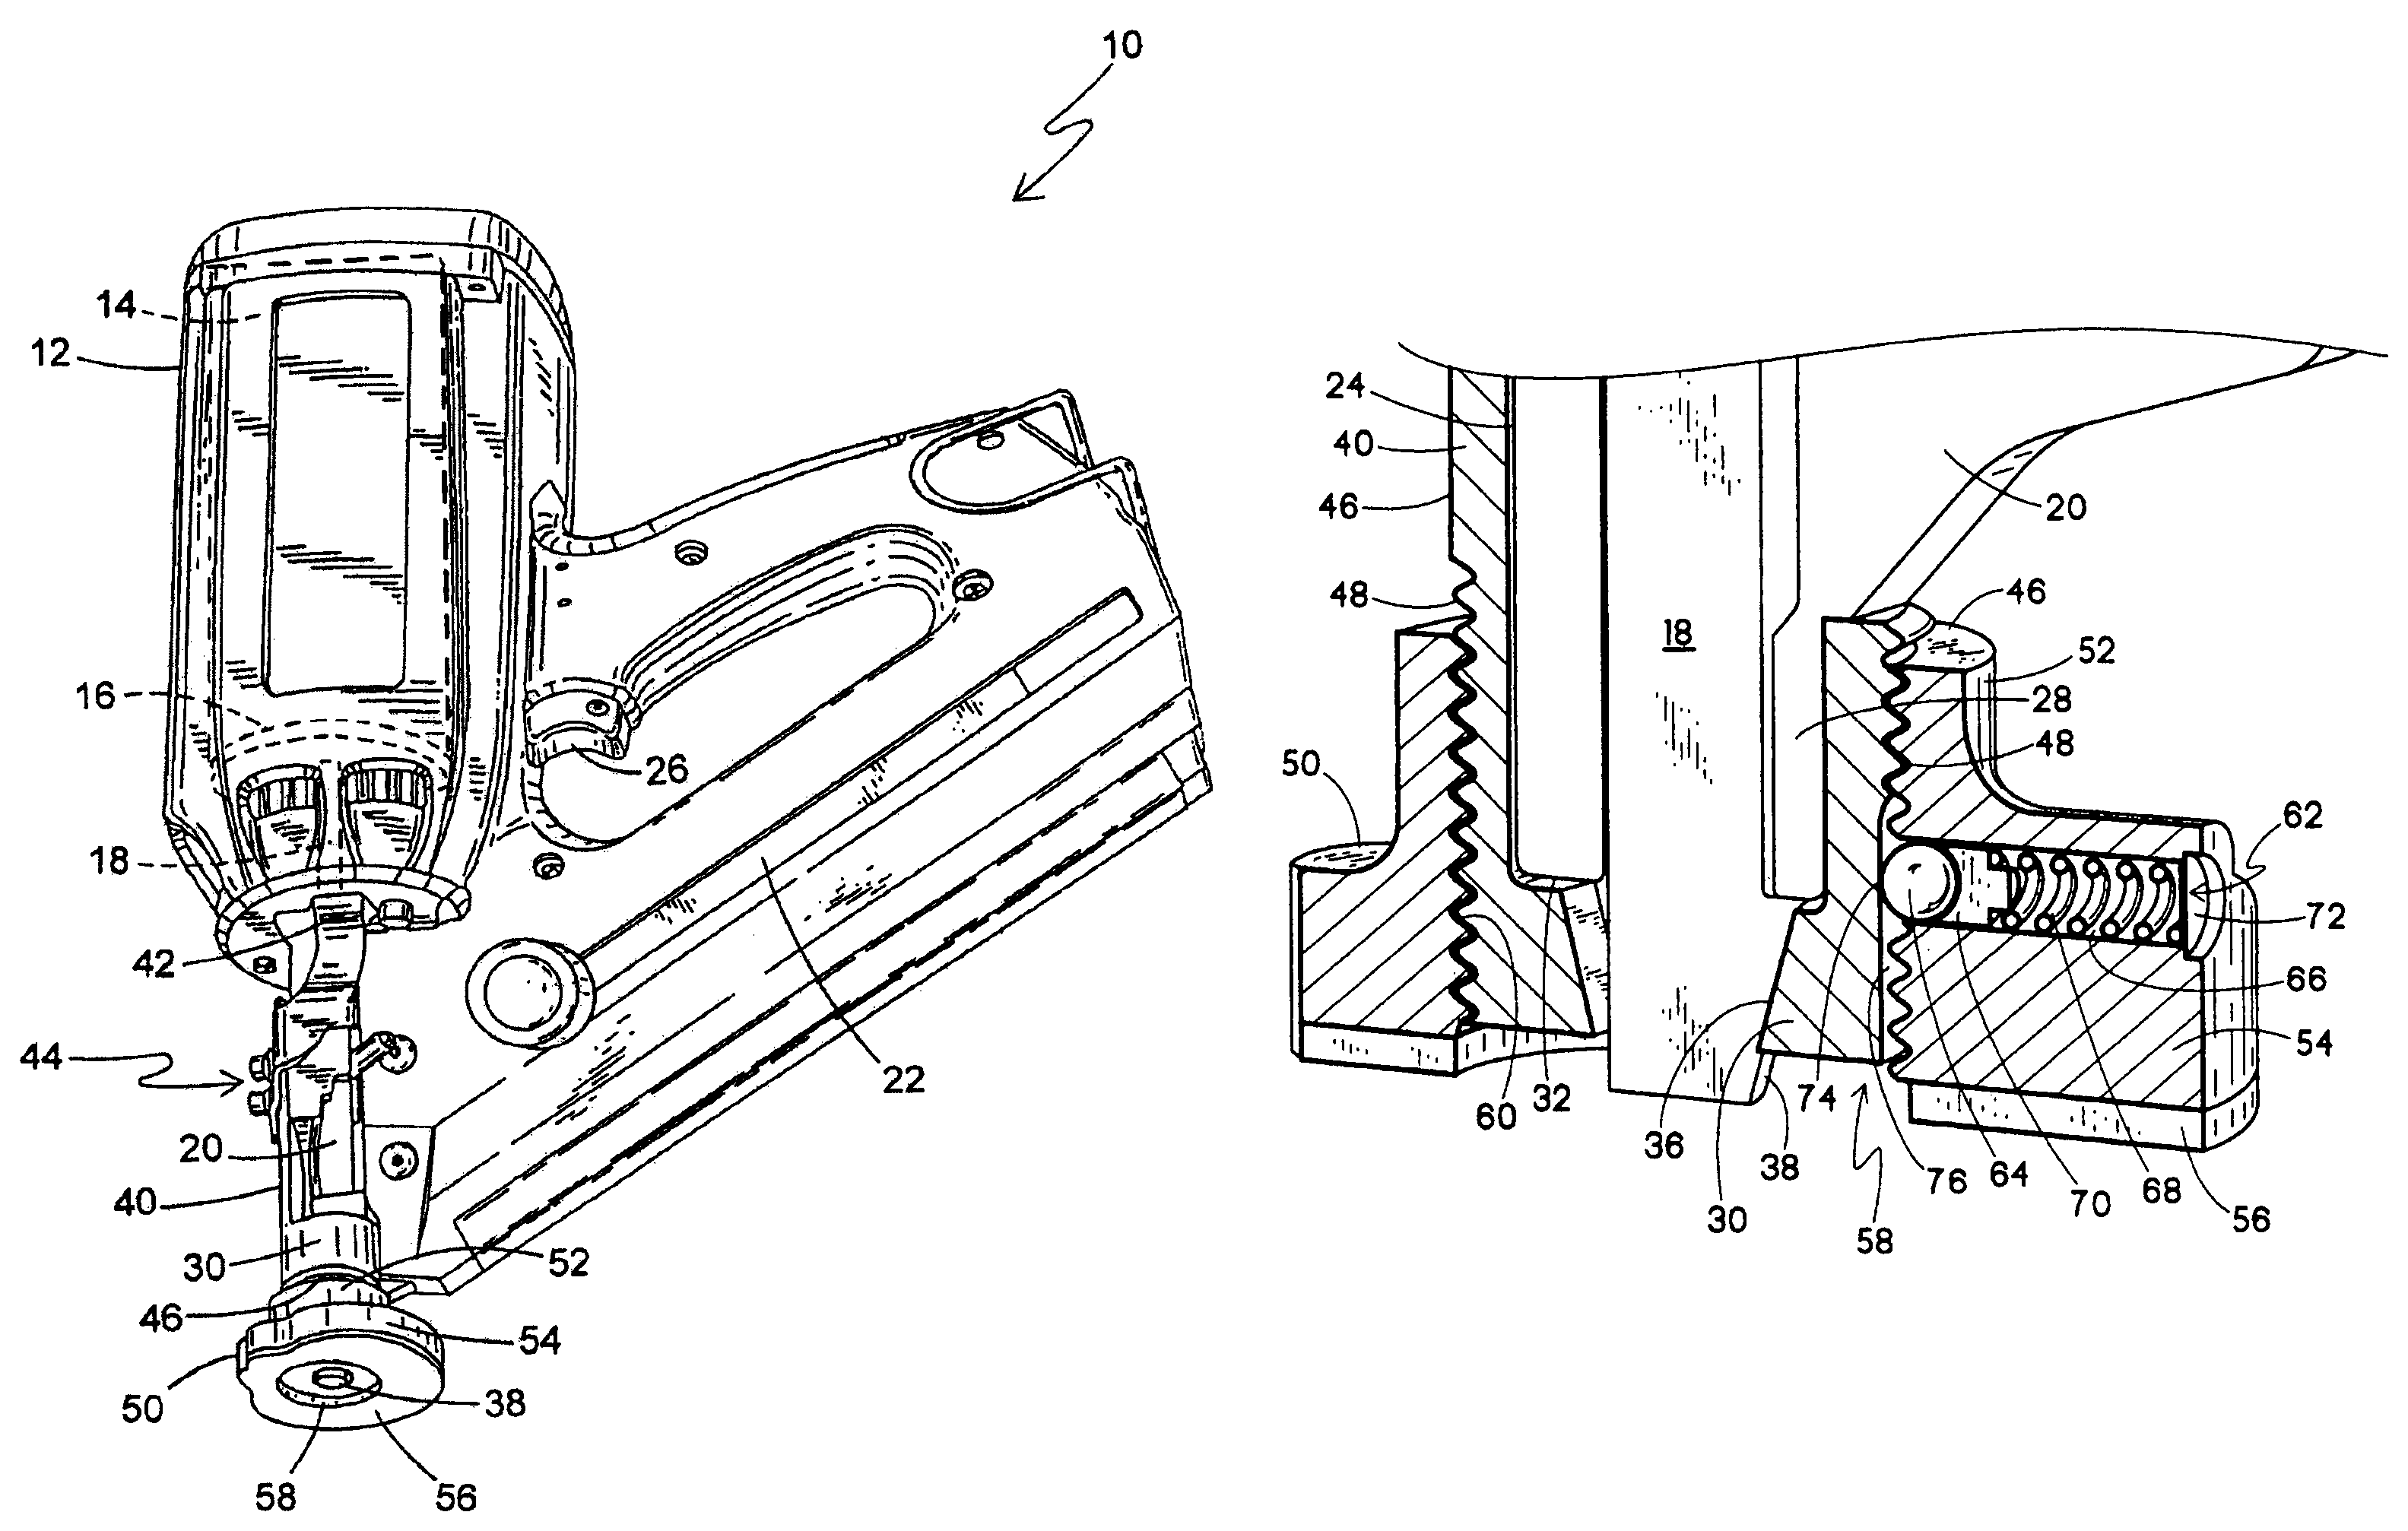 Depth of drive control with load transfer for fastener driver